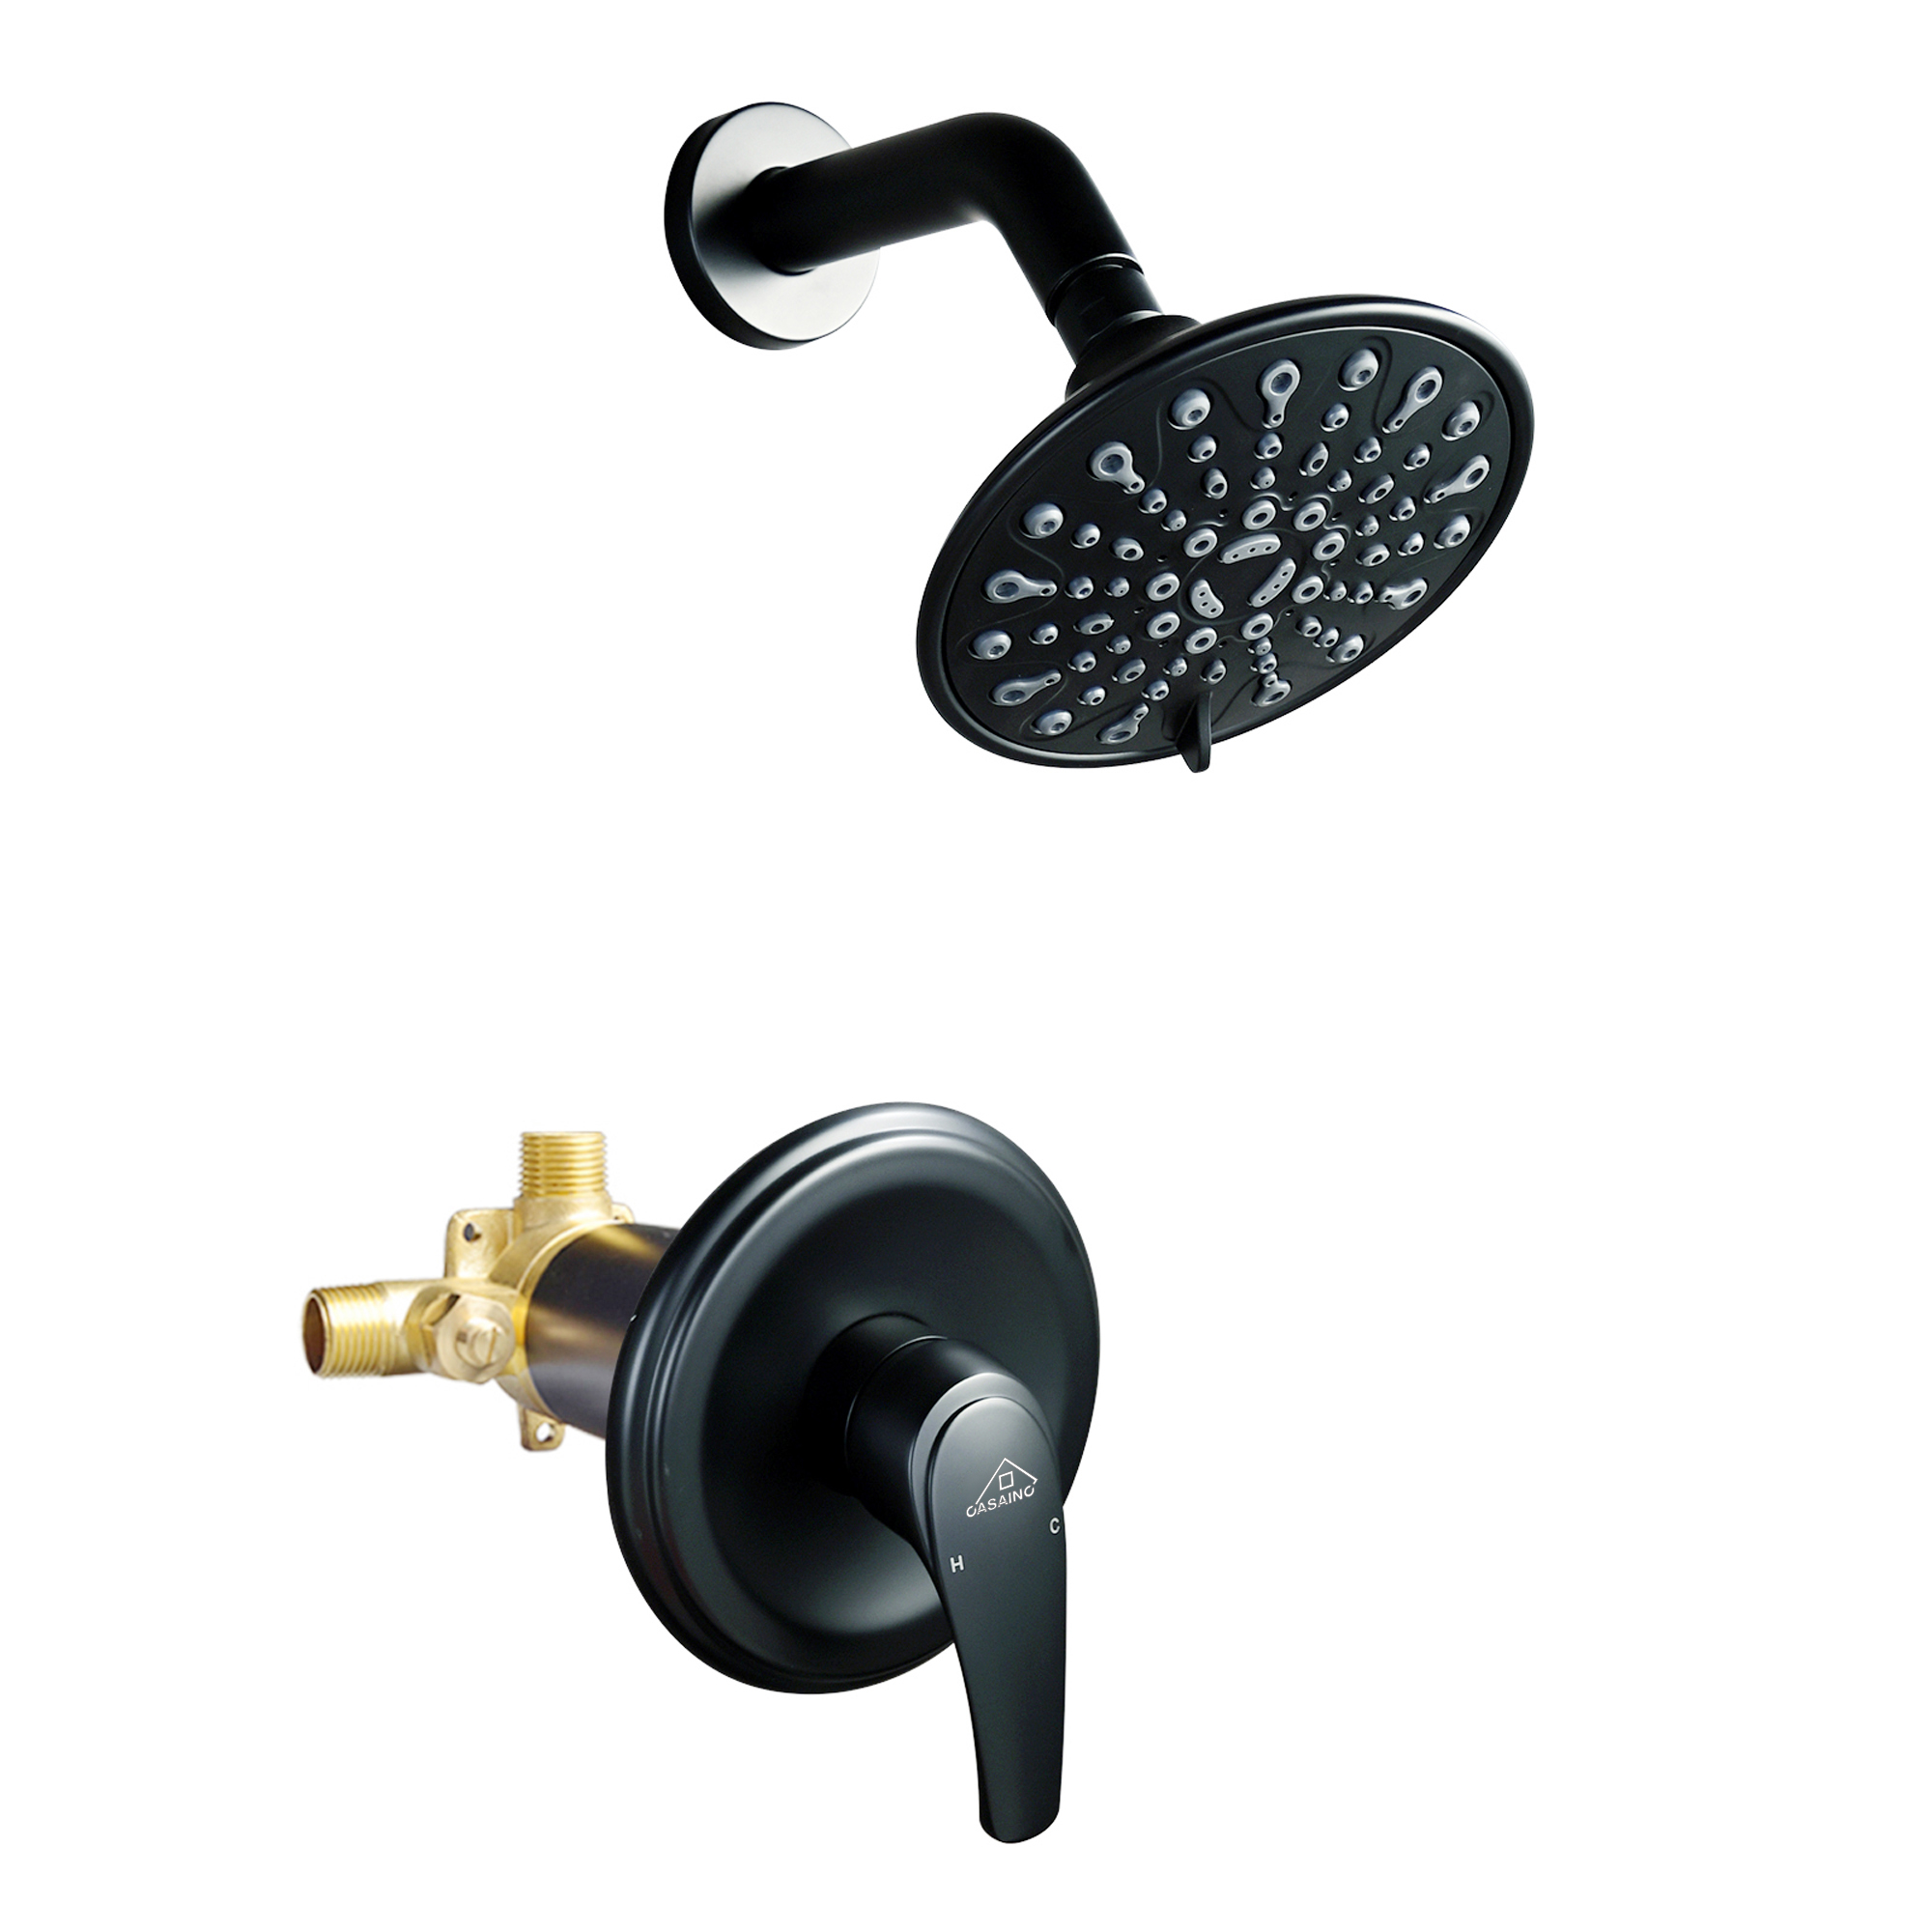 Wall Mounted 6-In Shower Faucet with 6-Spray Patterns & Balanced Water Pressure by Water Flow Restrictors (Matte Black Finish)-CASAINC